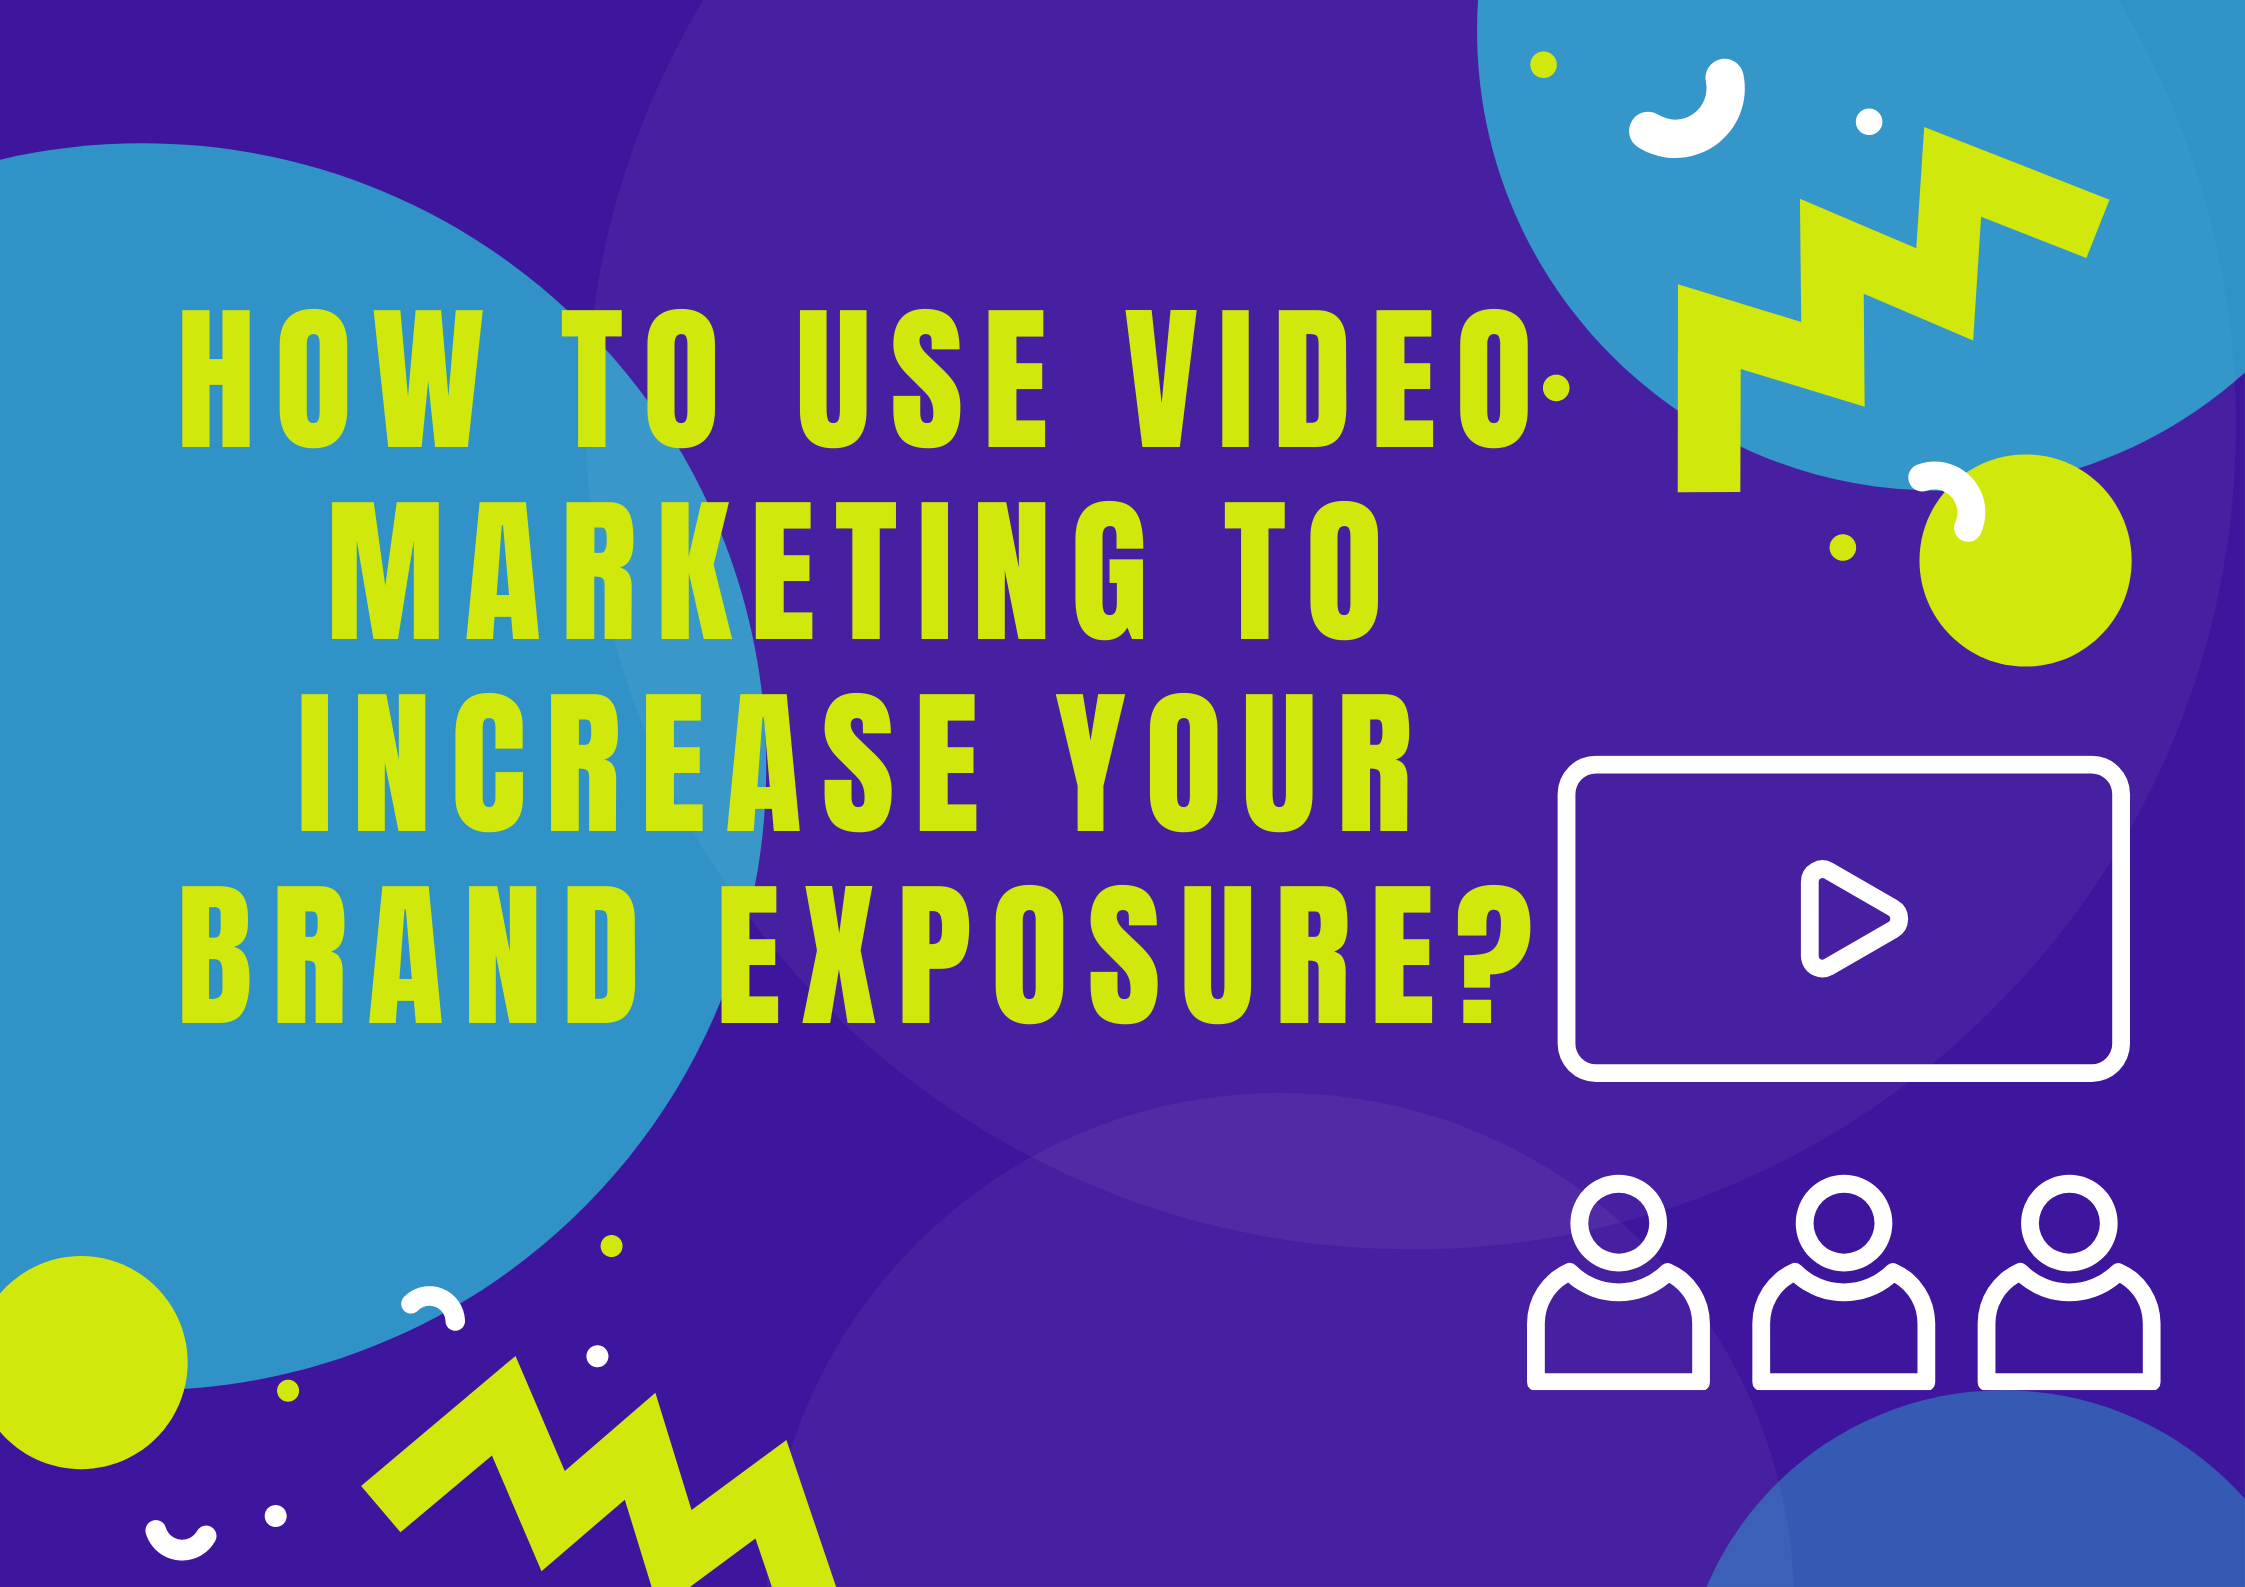 How to use video marketing to increase your brand exposure